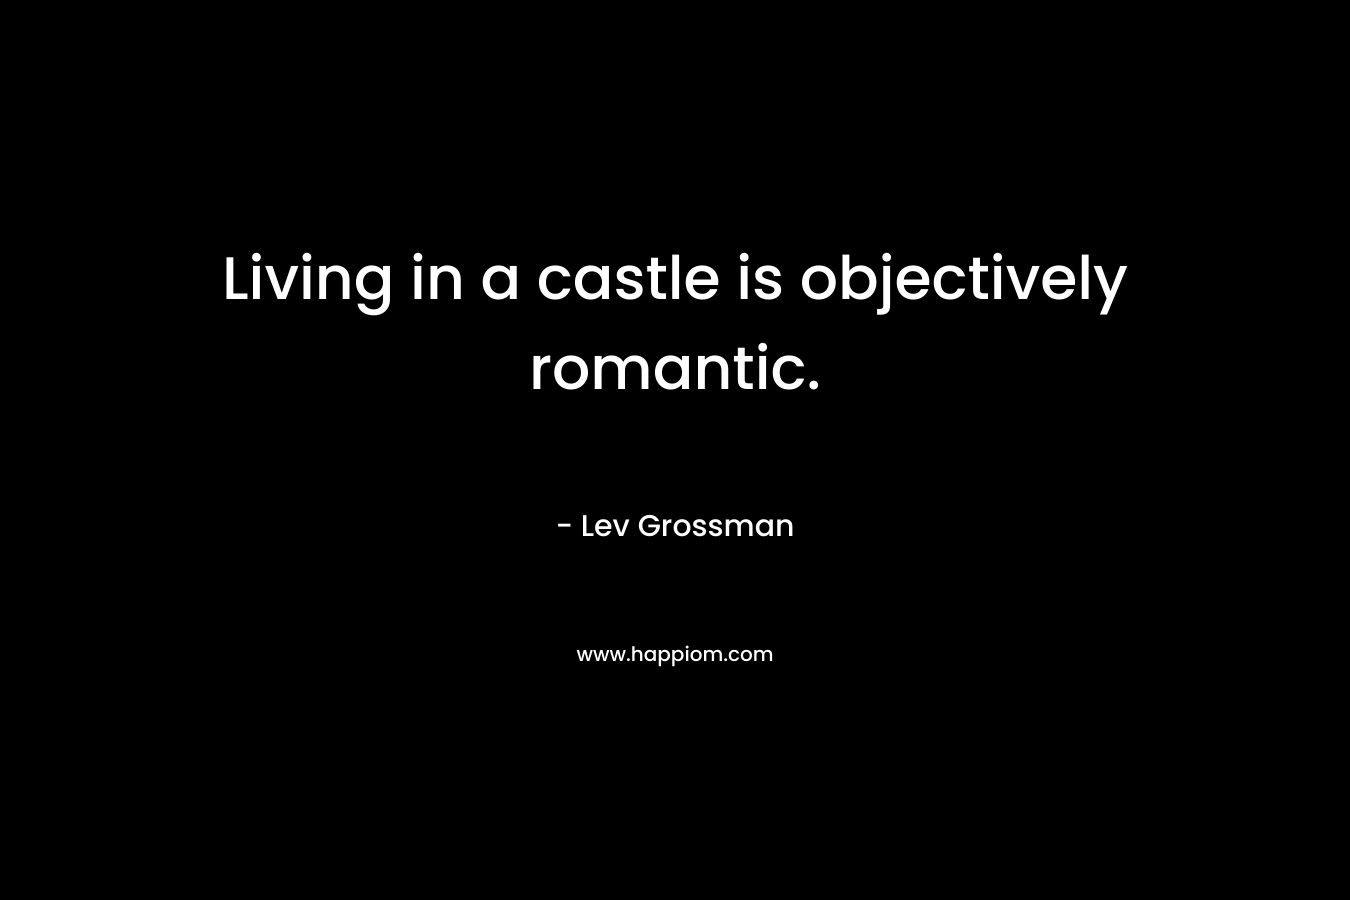 Living in a castle is objectively romantic. – Lev Grossman